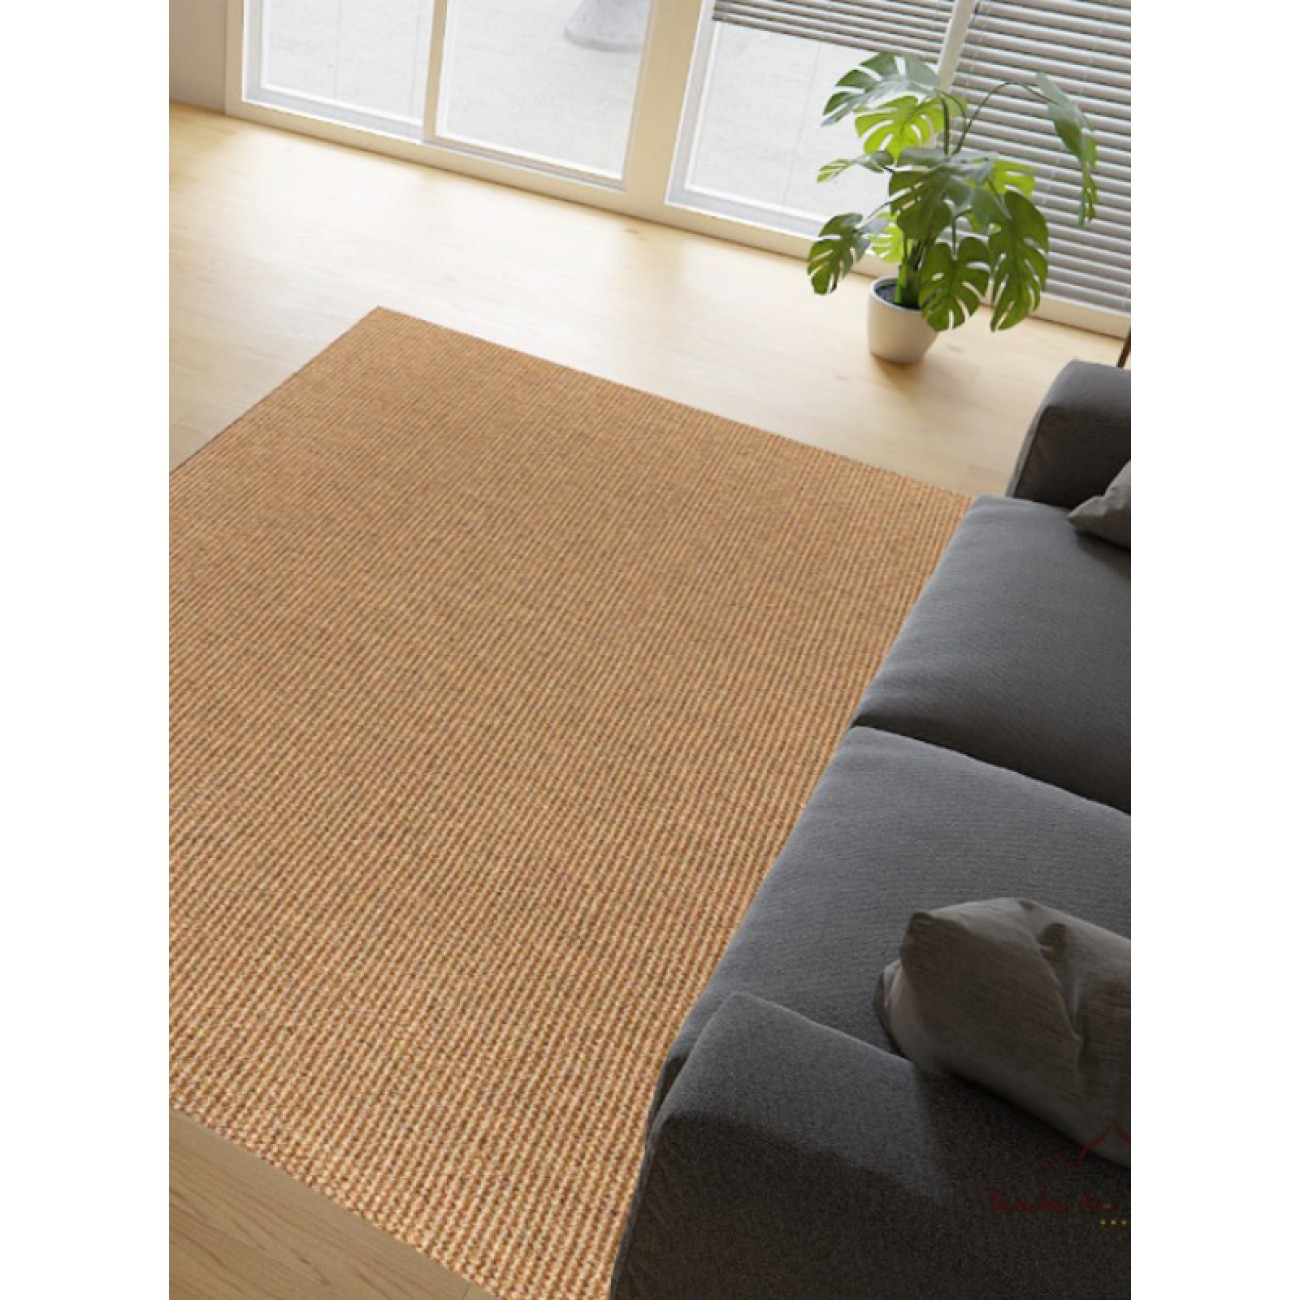 Tapete Sisal Camelo FD - Personalizável